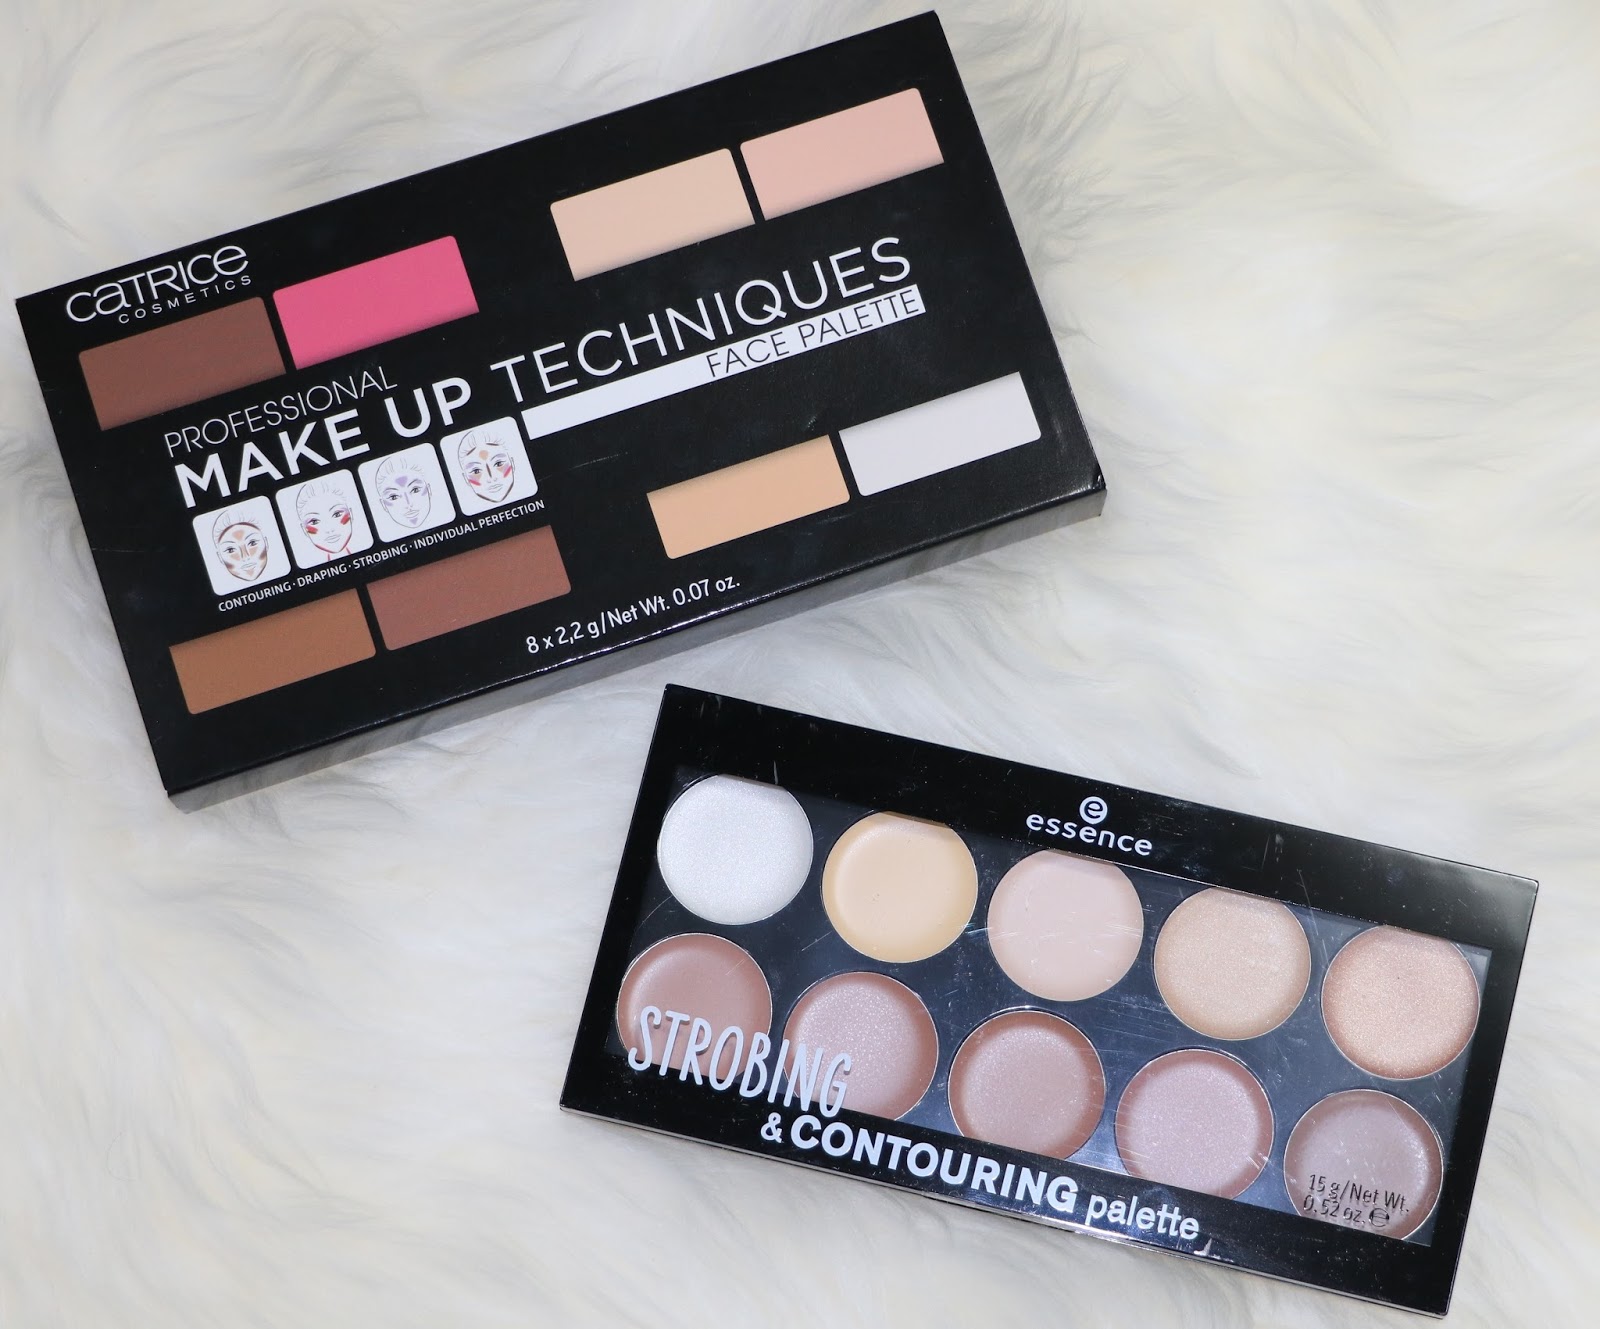 Battle of the Brands | Catrice Professional Make Up Techniques Face Palette  vs Essence Strobing & Contouring Palette - Lara's Pint of Style